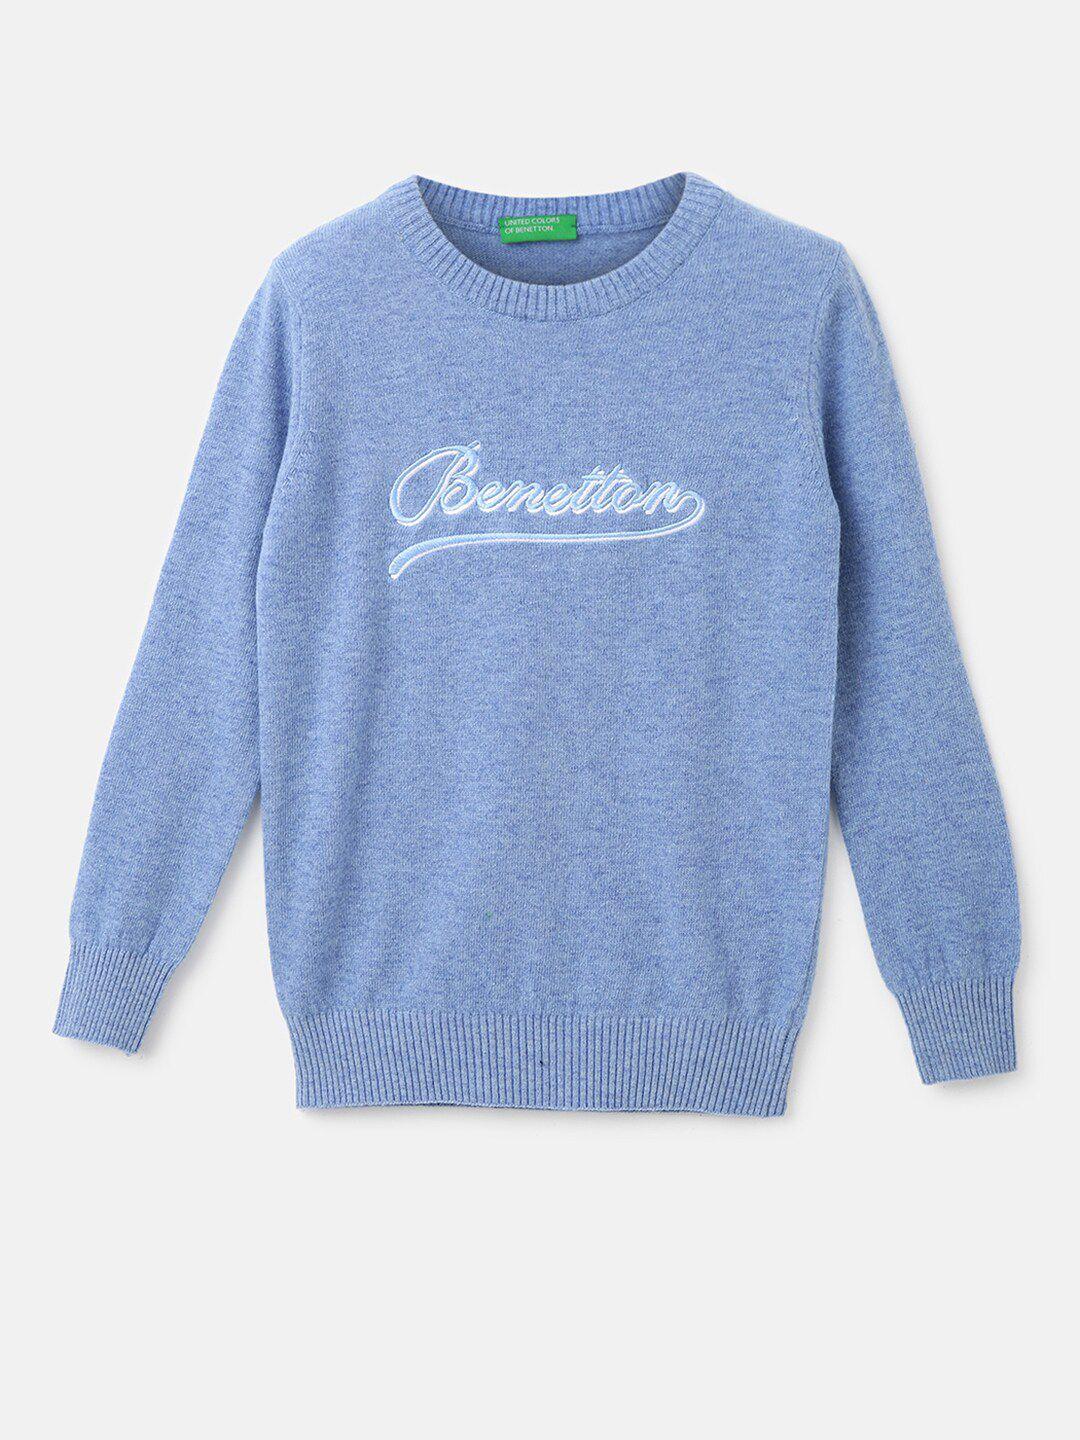 united colors of benetton boys typography embroidered pullover sweater